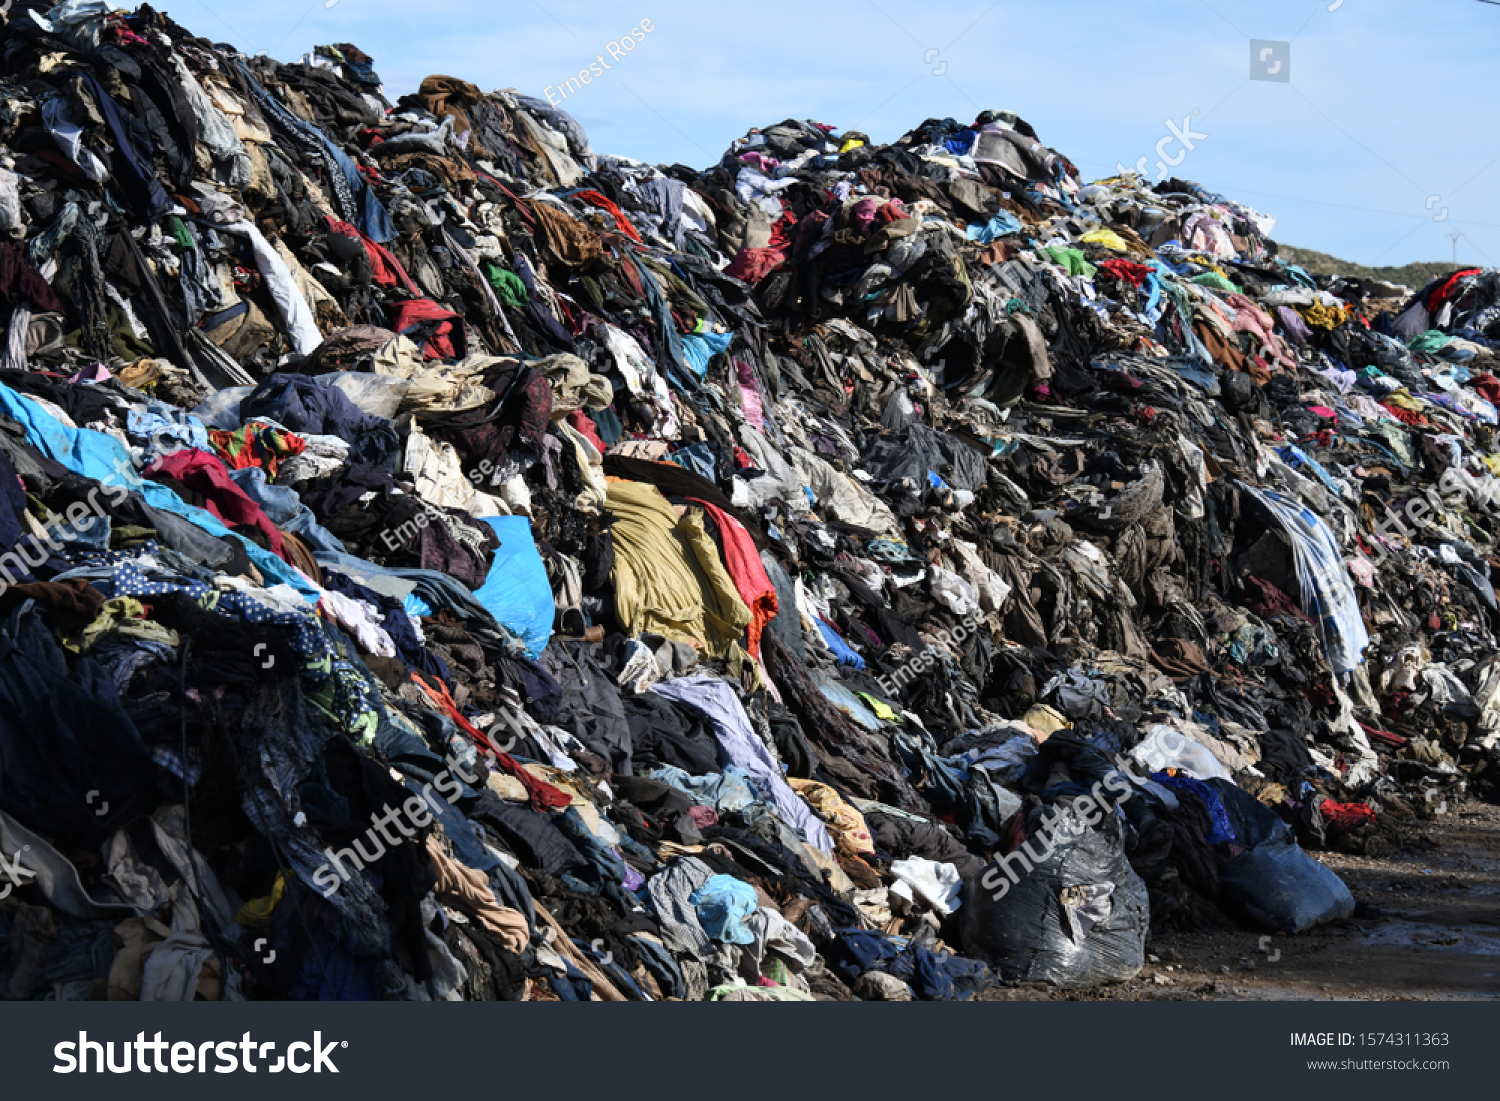 Burnt clothes on a bin in the province of Alicante, Costa Blanca, Spain #1574311363